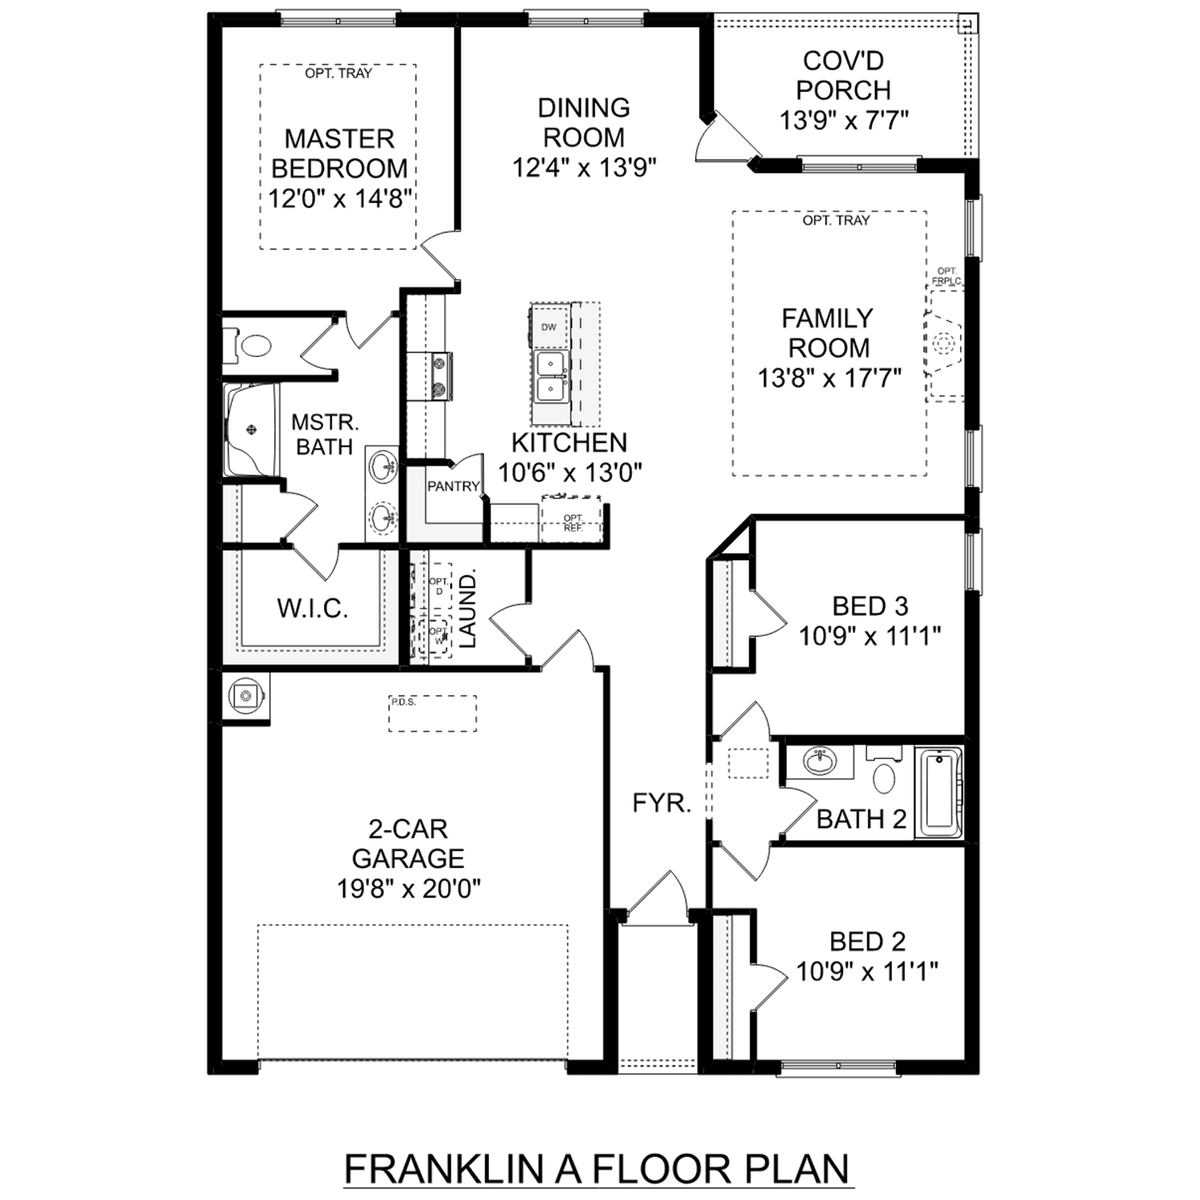 1 - The Franklin floor plan layout for 3142 Lea Lane in Davidson Homes' Hollon Meadow community.